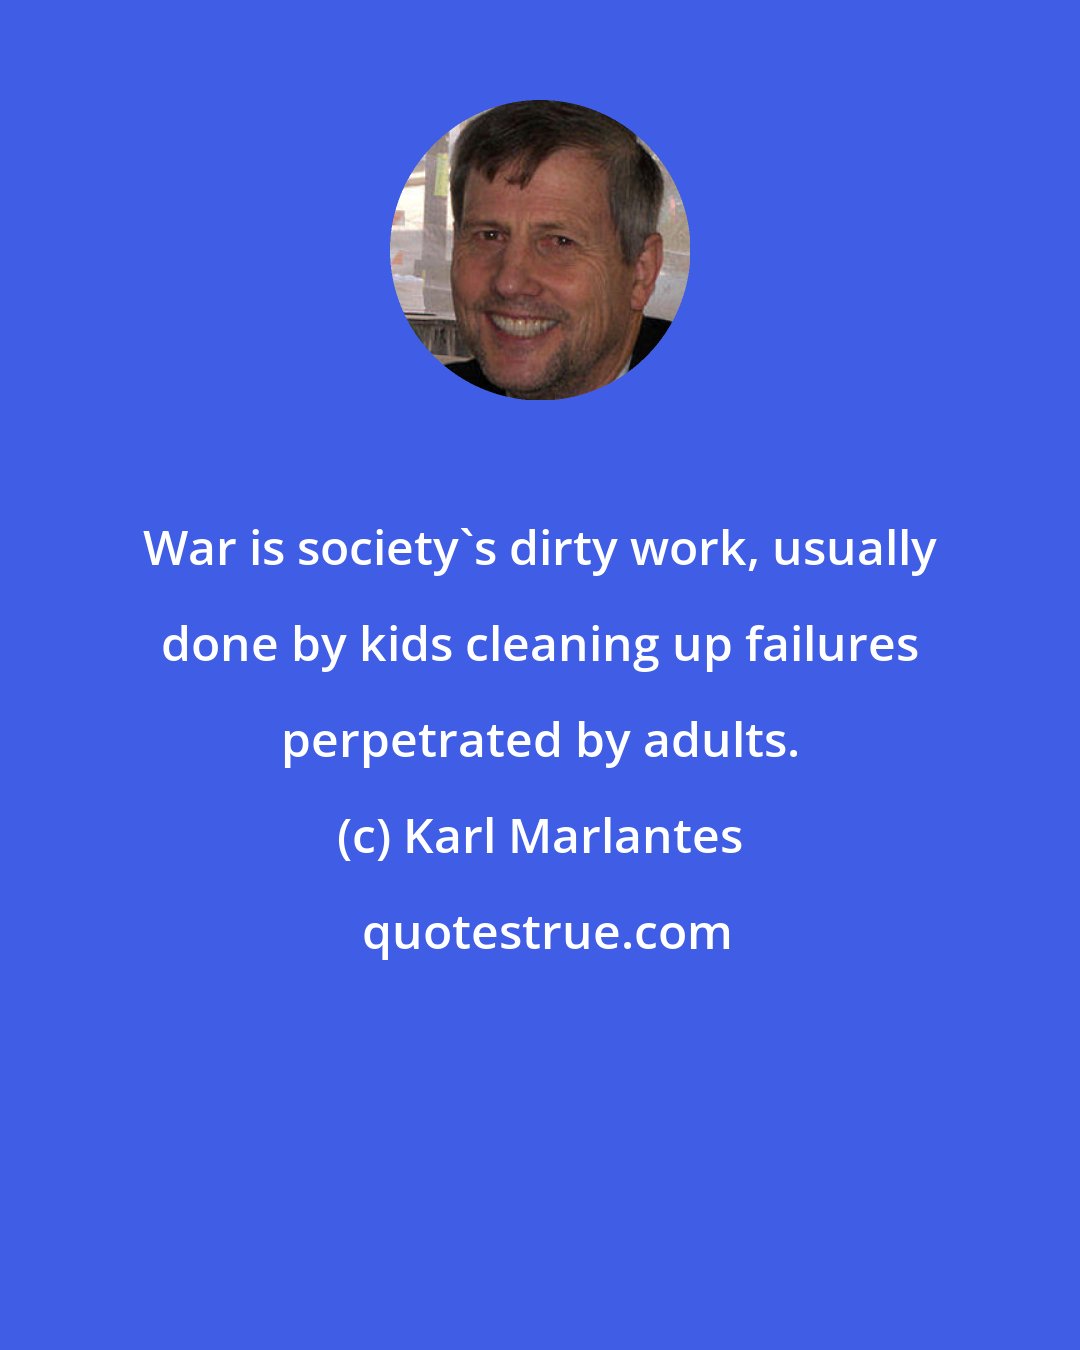 Karl Marlantes: War is society's dirty work, usually done by kids cleaning up failures perpetrated by adults.